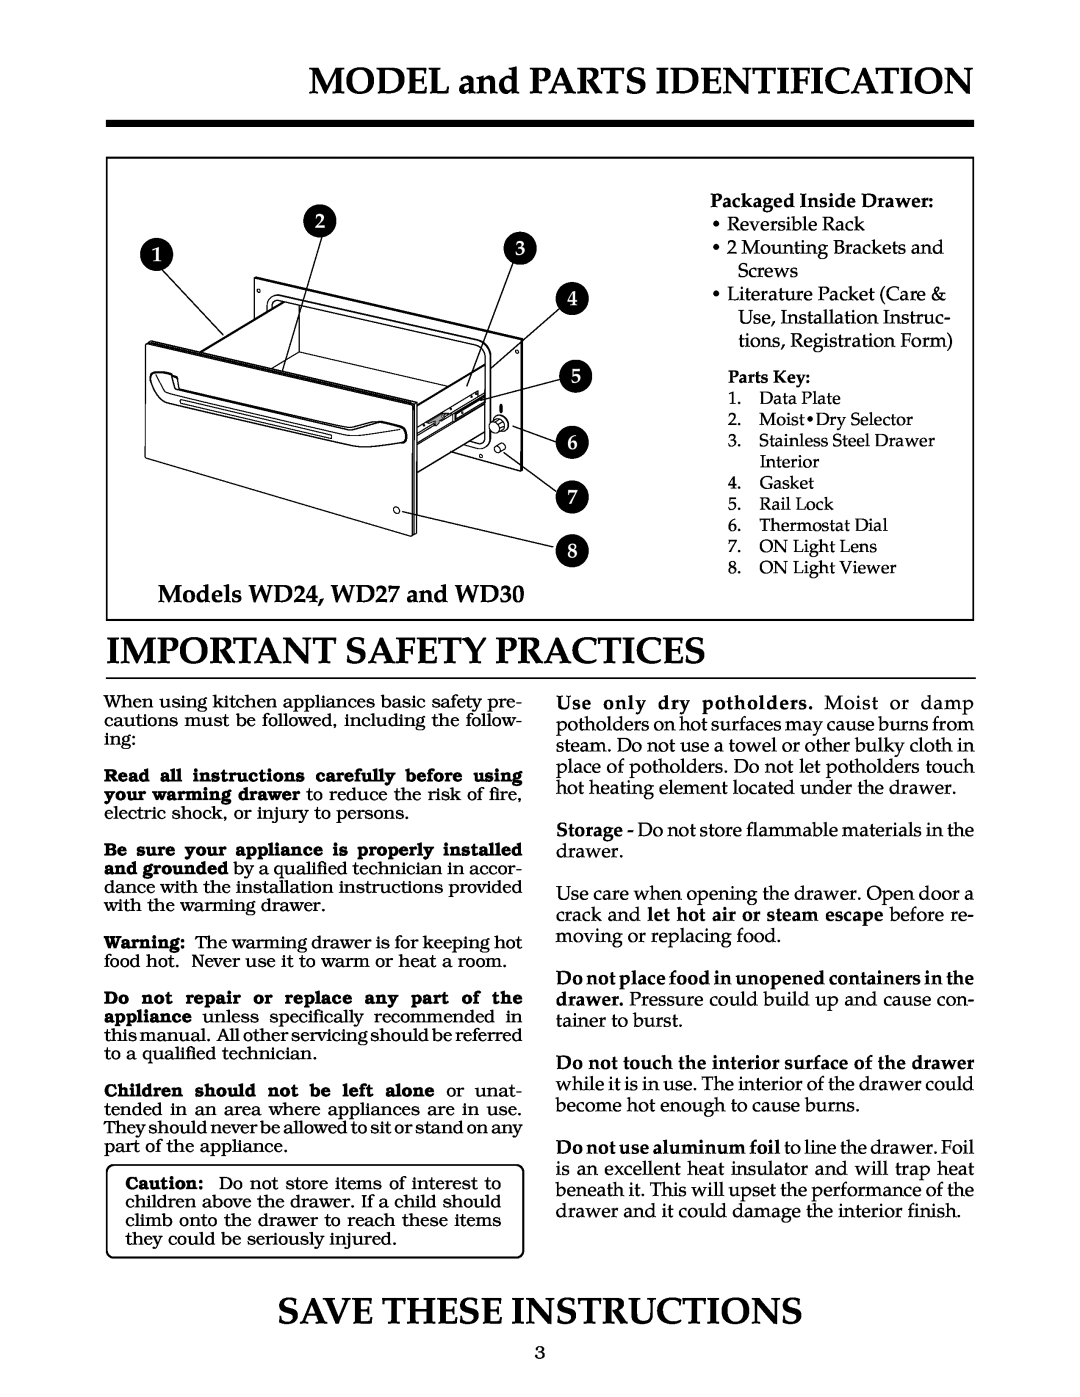 Thermador WD30 MODEL and PARTS IDENTIFICATION, Important Safety Practices, Save These Instructions, Packaged Inside Drawer 